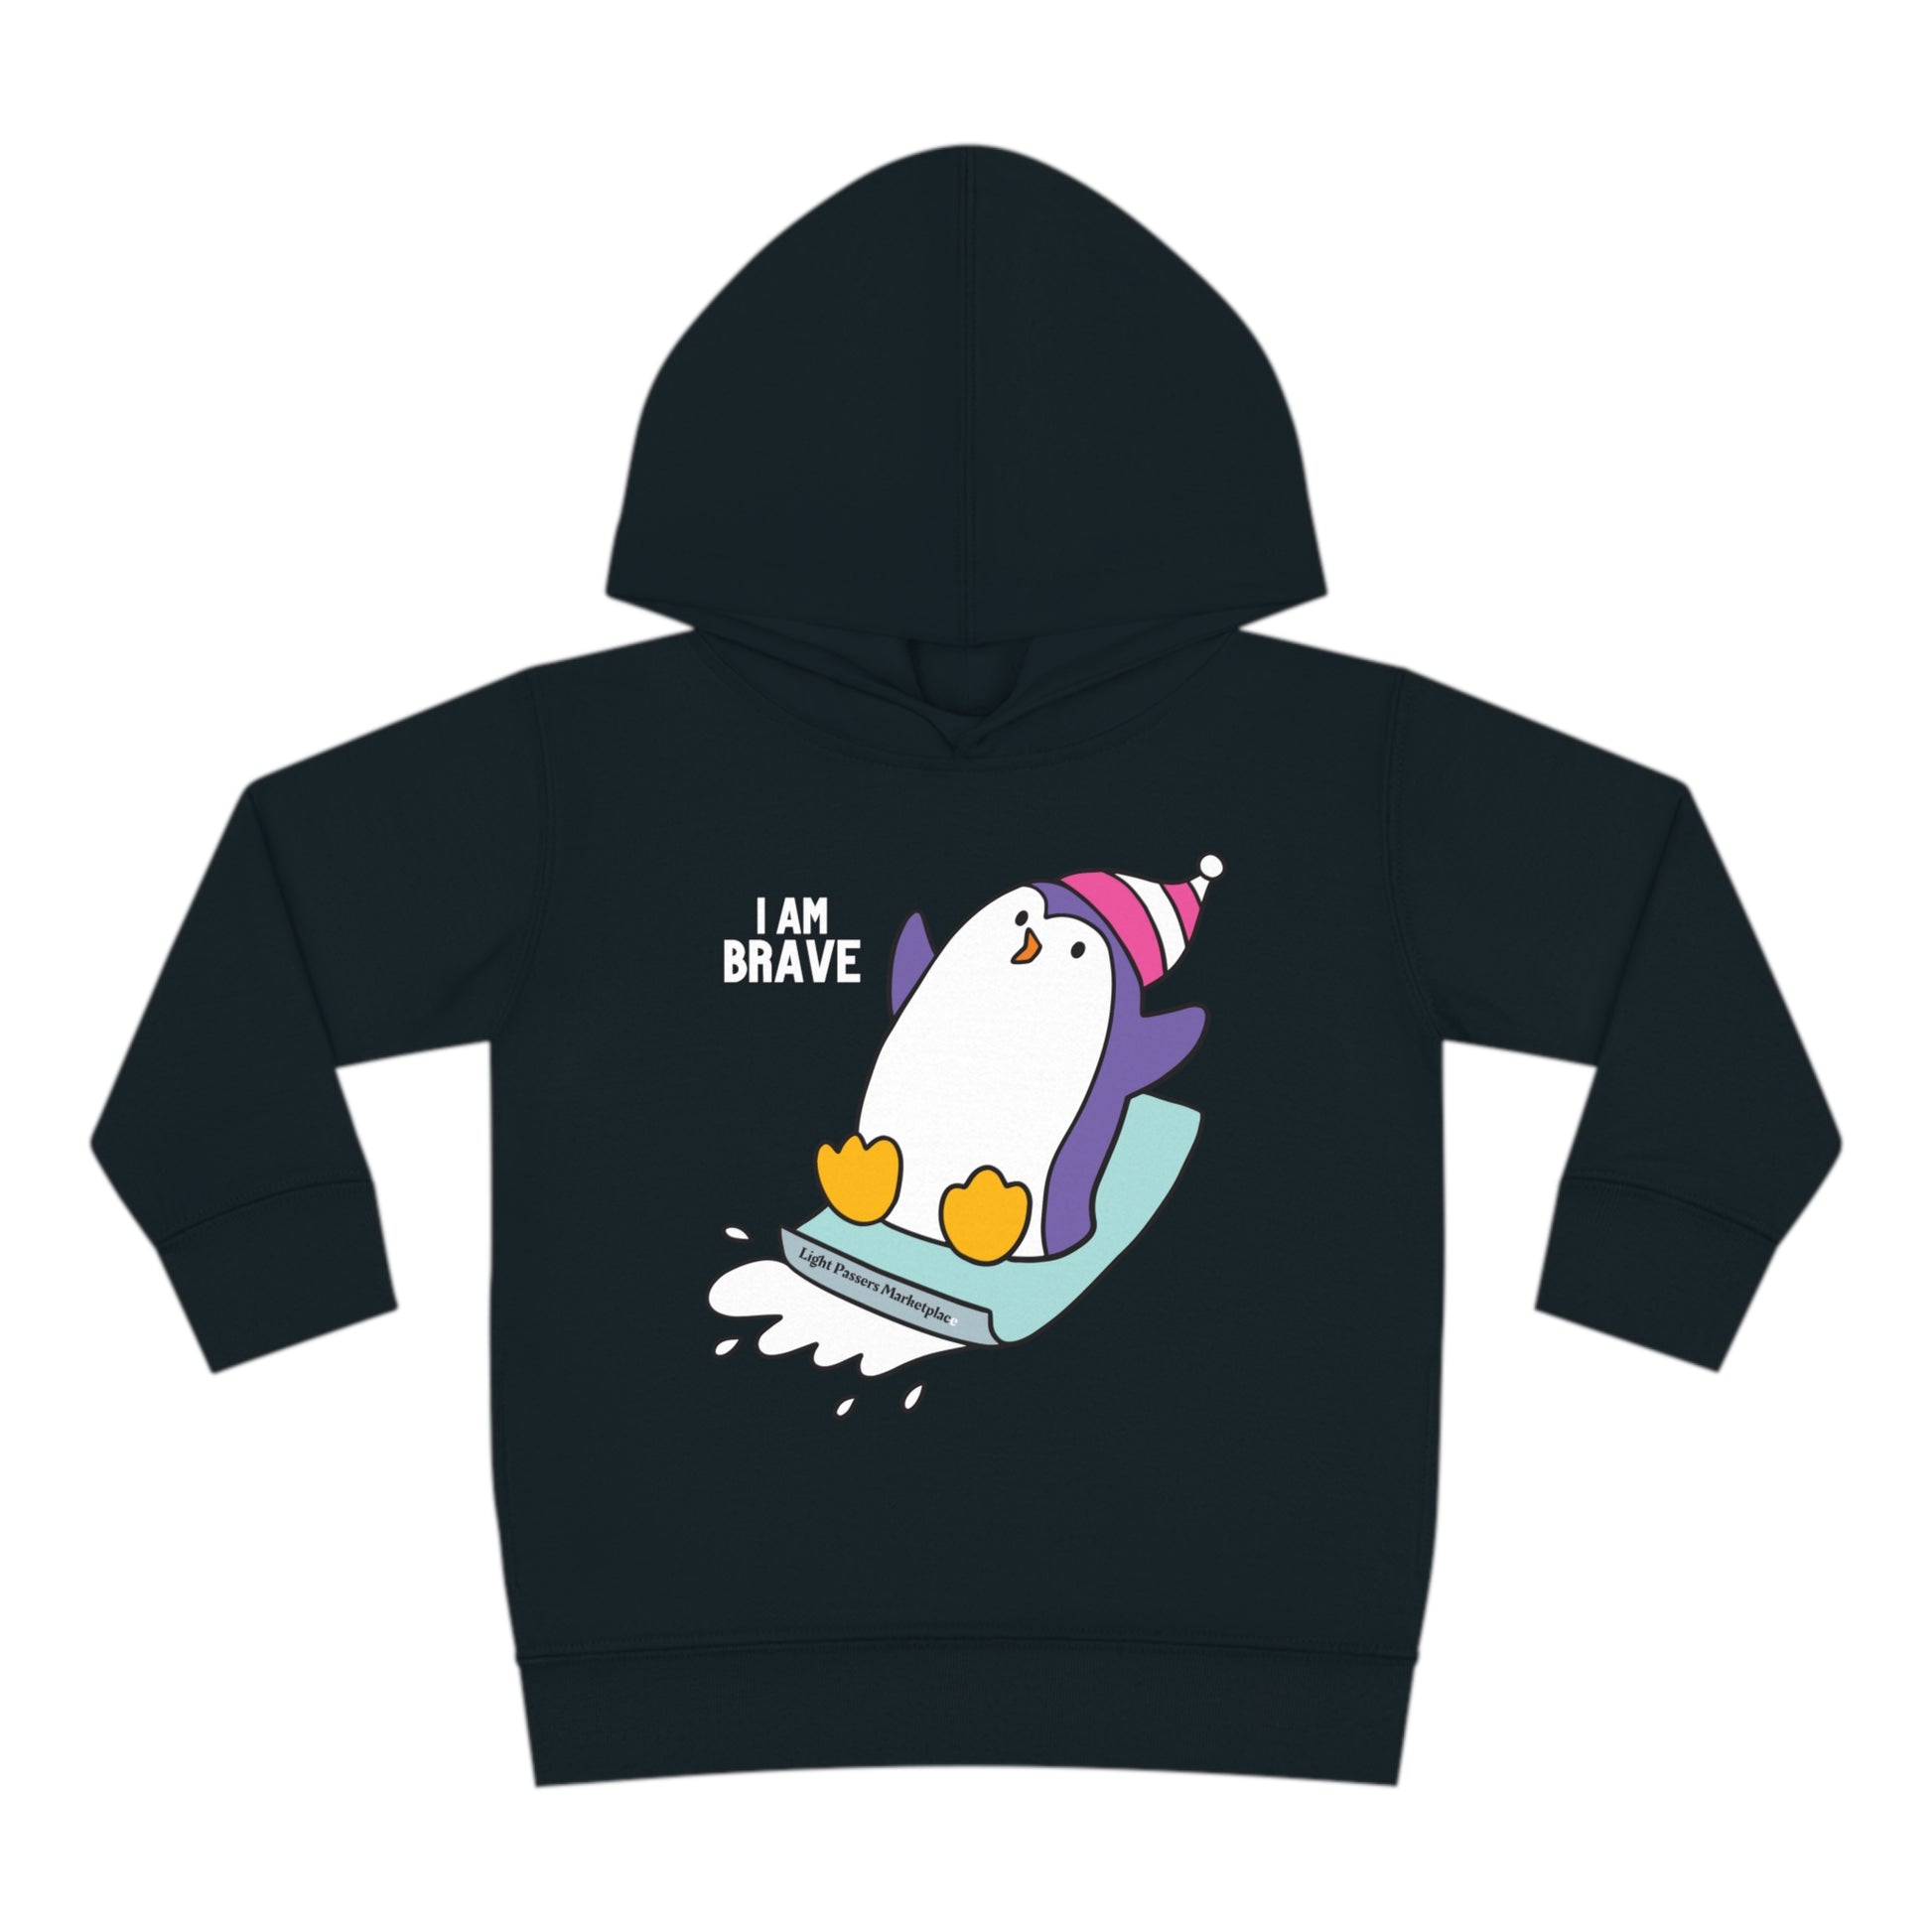 A Rabbit Skins toddler hoodie featuring a brave penguin design, with jersey-lined hood, cover-stitched details, side-seam pockets, and durable construction for lasting coziness.